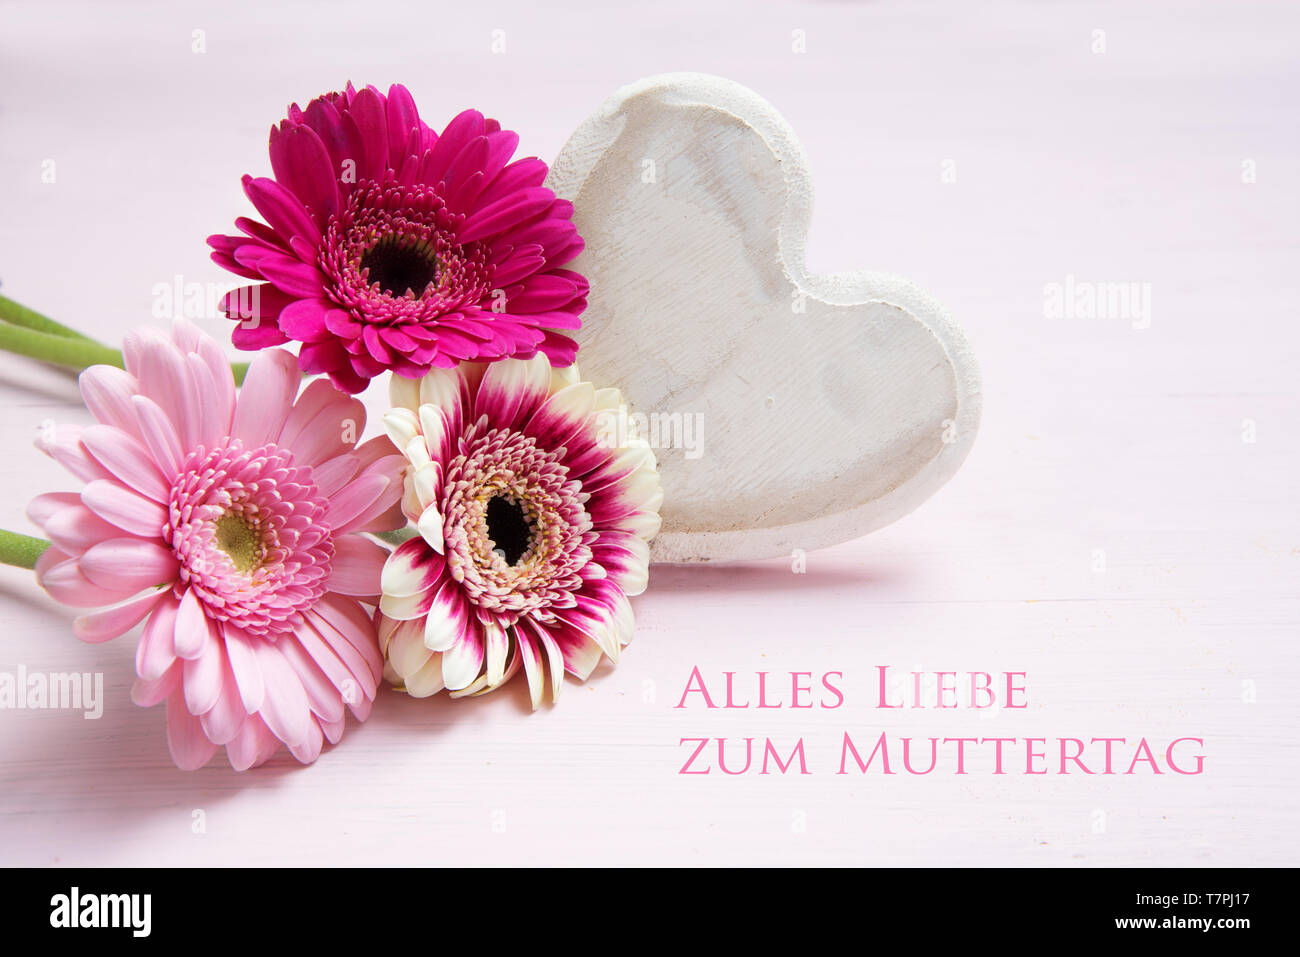 pink flowers and a white painted wooden heart on a pastel colored background, german text Alles Liebe zum Muttertag, meaning All Love for Mother's Day Stock Photo